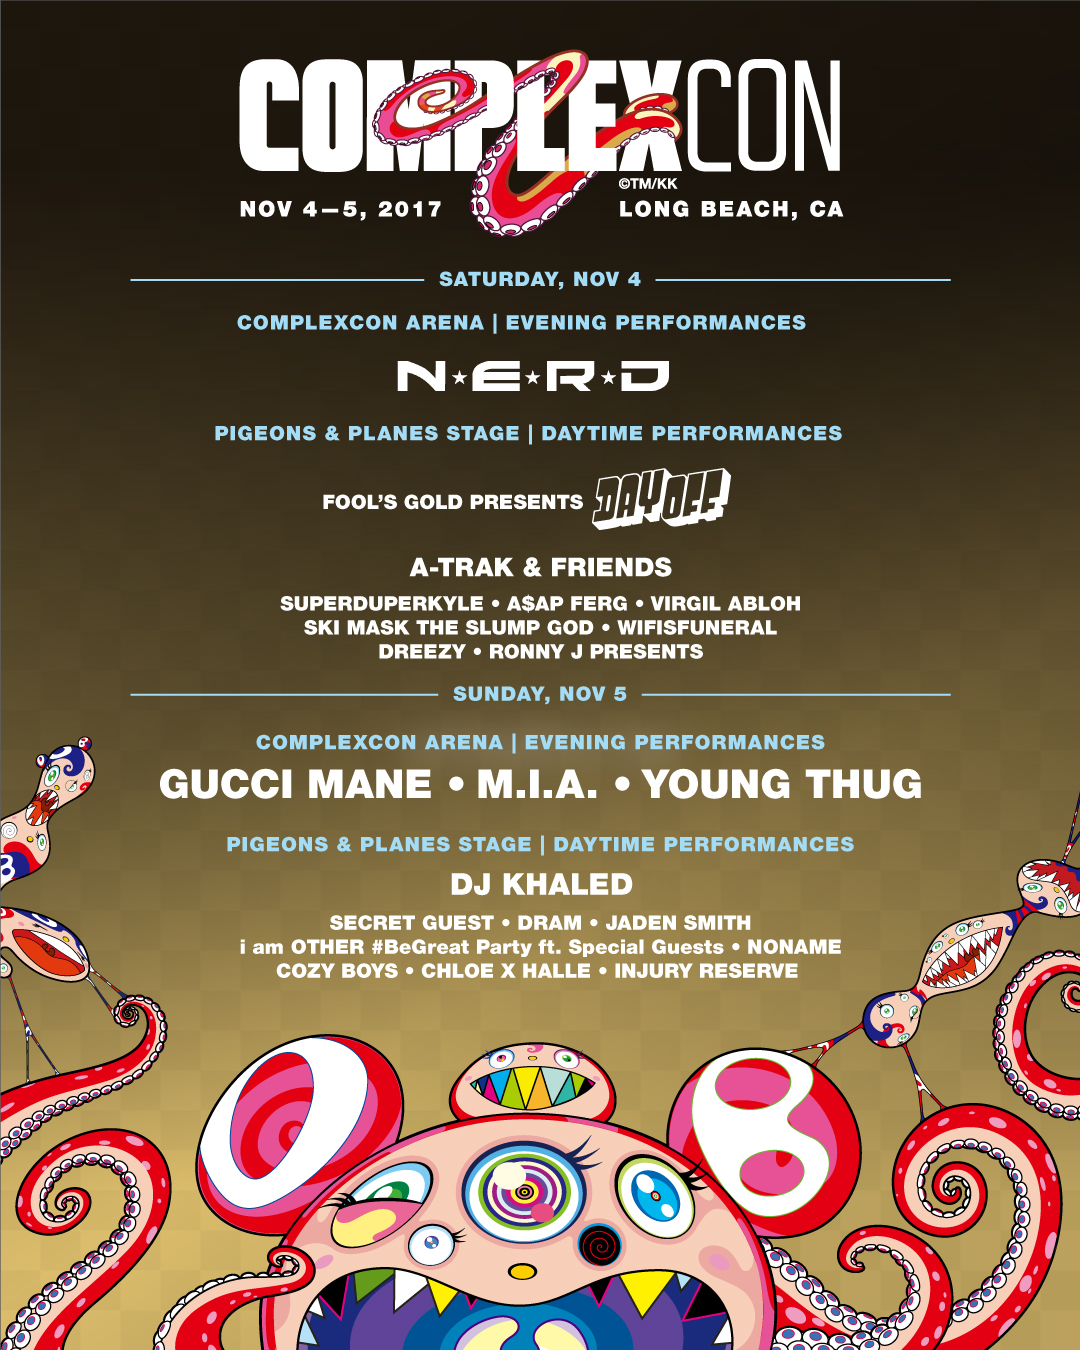 ComplexCon Announces Lineup with N*E*R*D, Gucci Mane, M.I.A. + Young